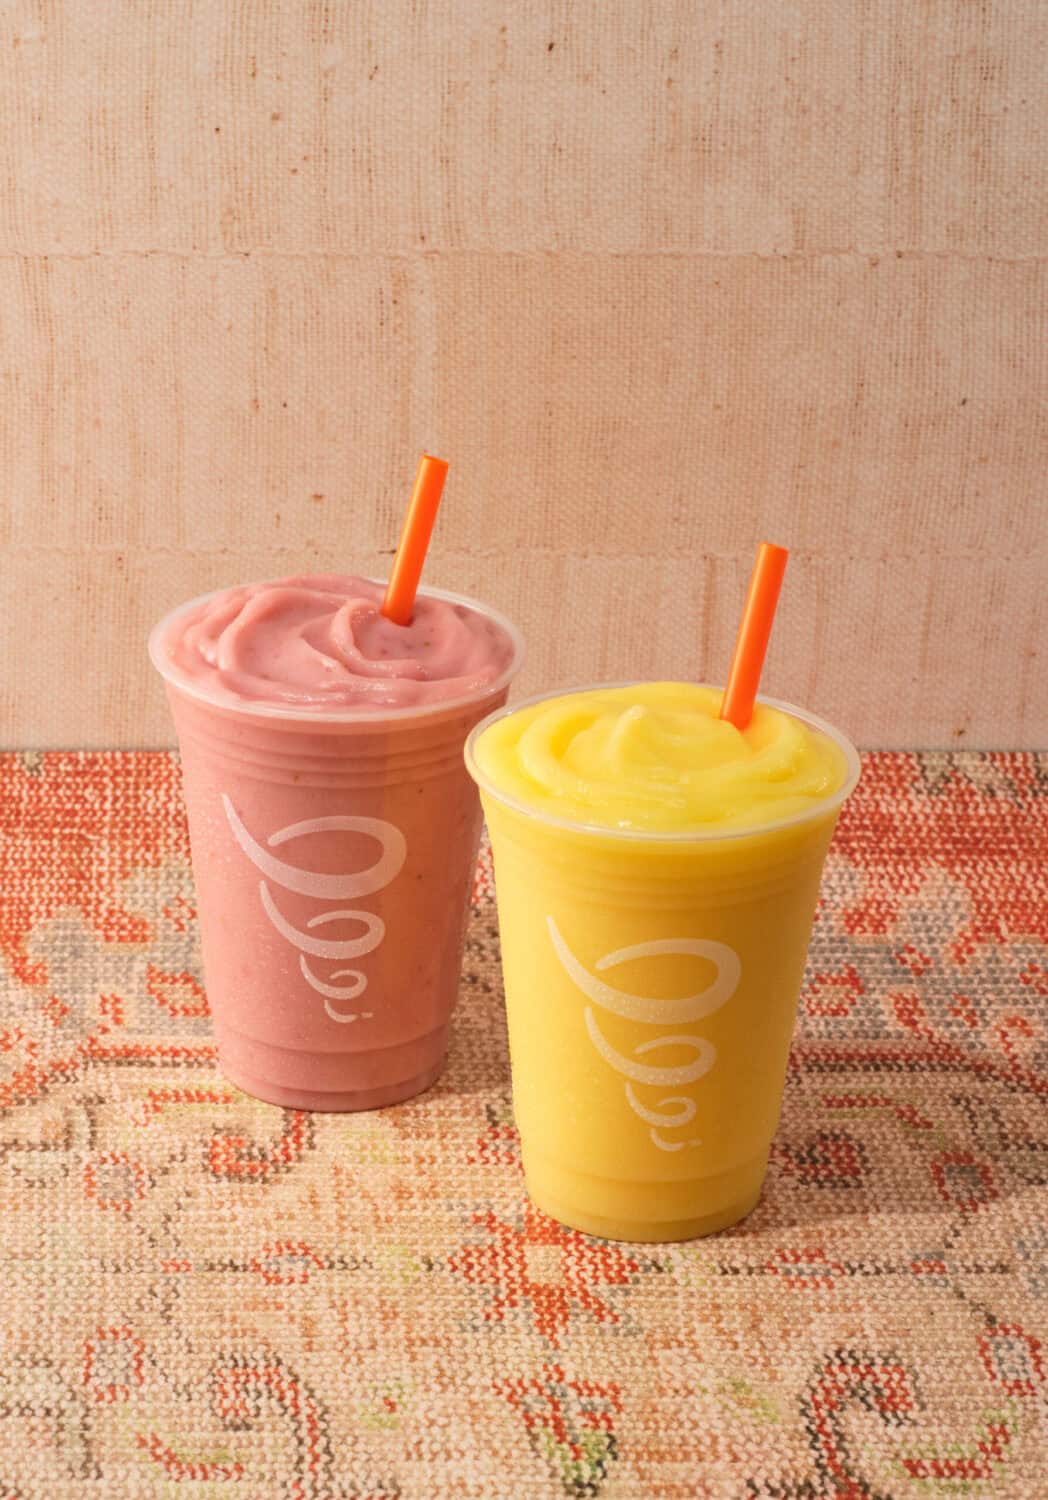 2 smoothies from Jamba